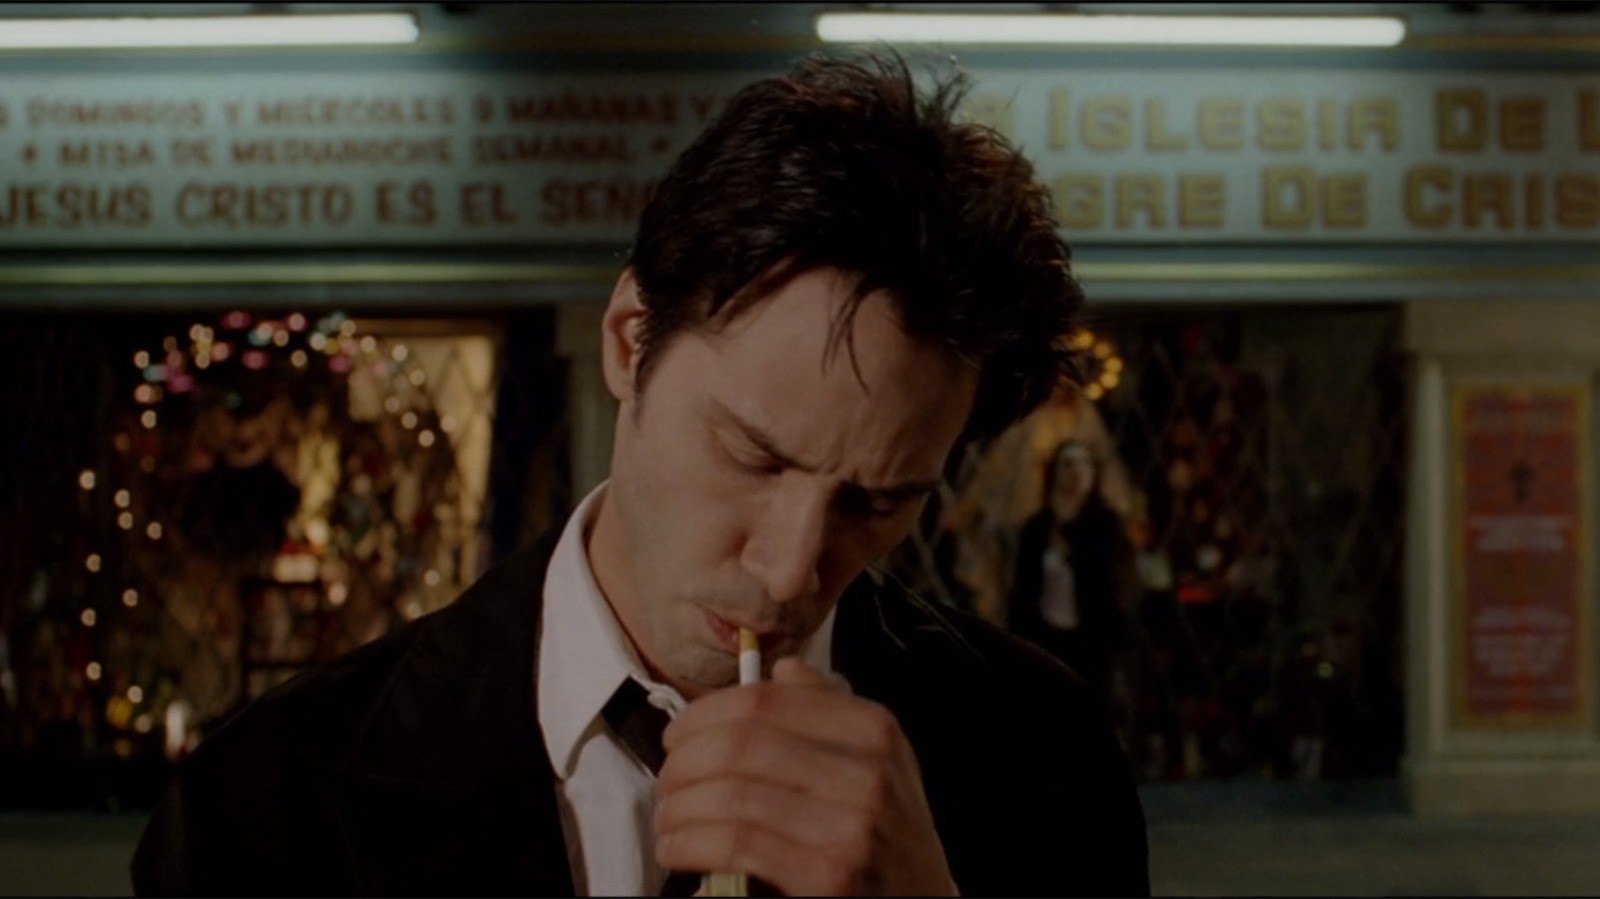 Keanu Reeves will return as John Constantine in the upcoming sequel.